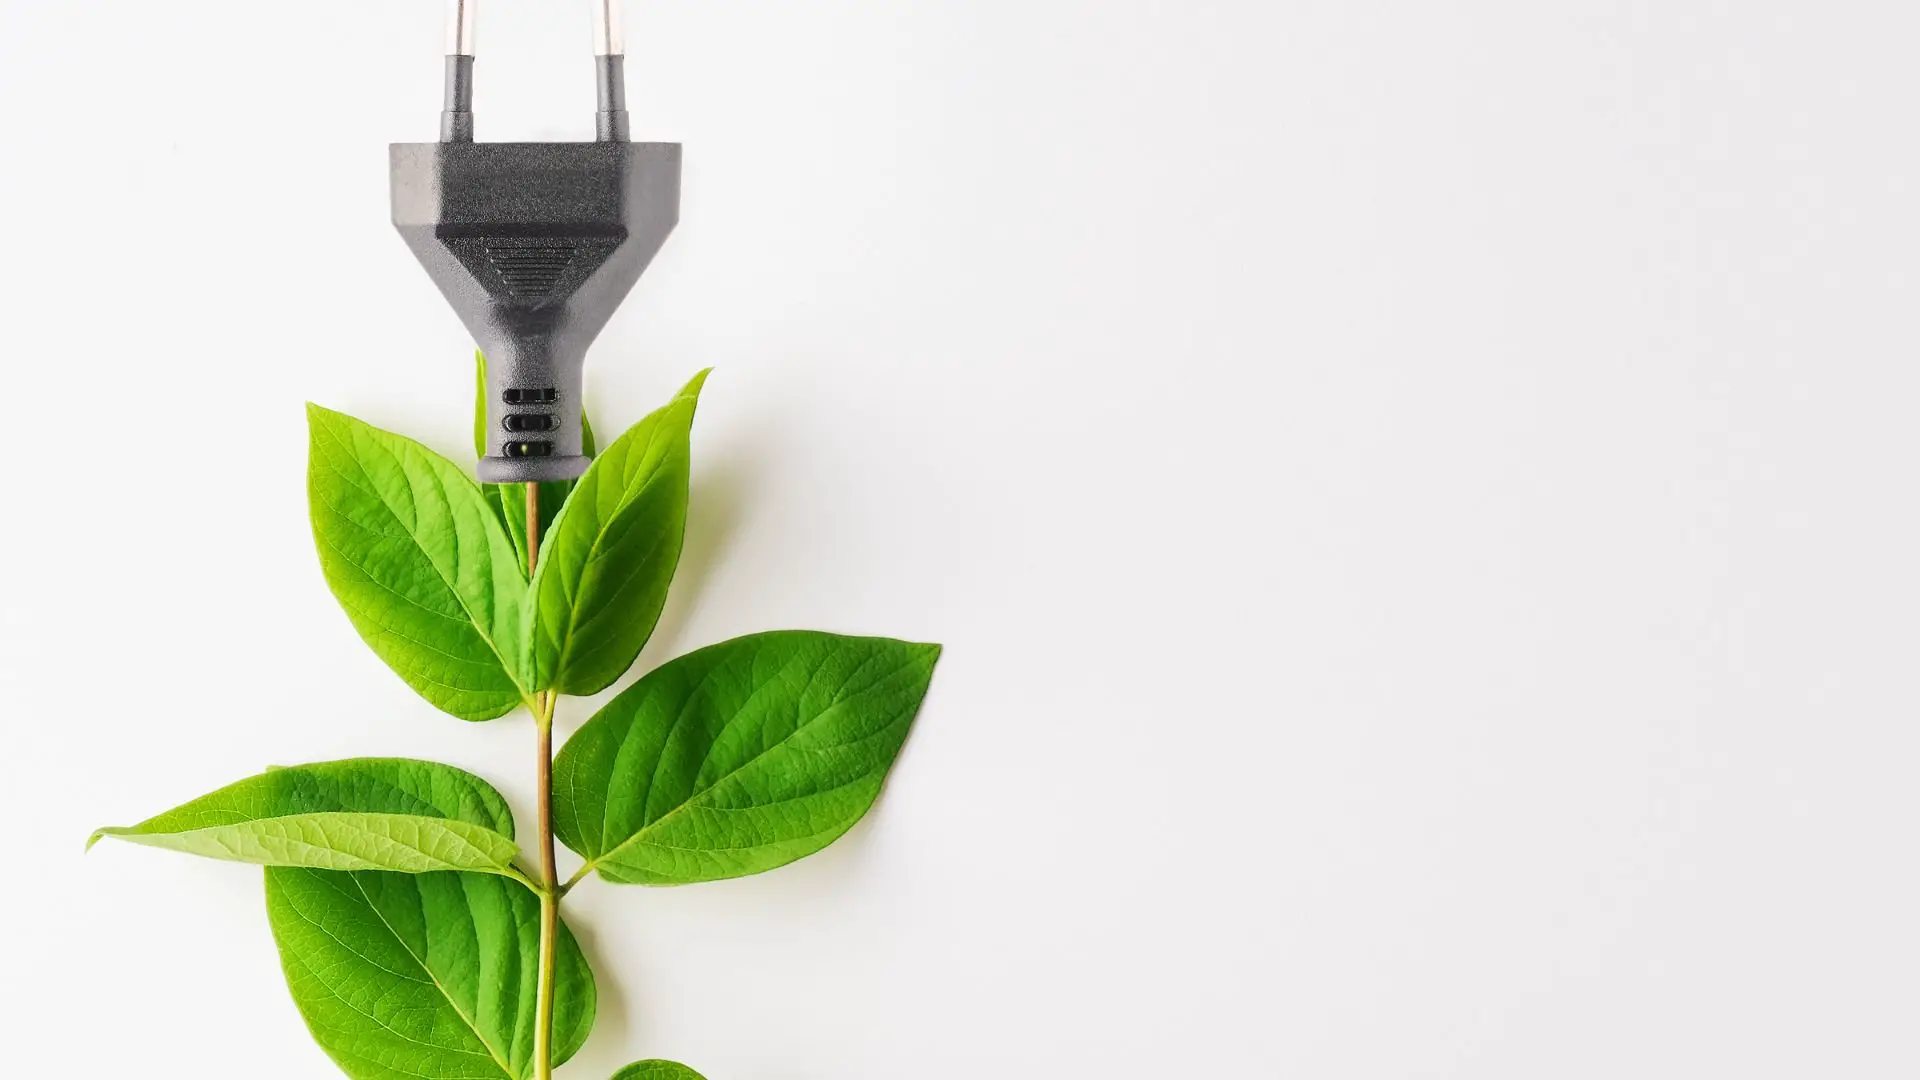 % Learn how to integrate hydroponics systems with renewable energy sources in your garden for a more sustainable and eco-friendly experience! Discover the various methods you can adopt here.